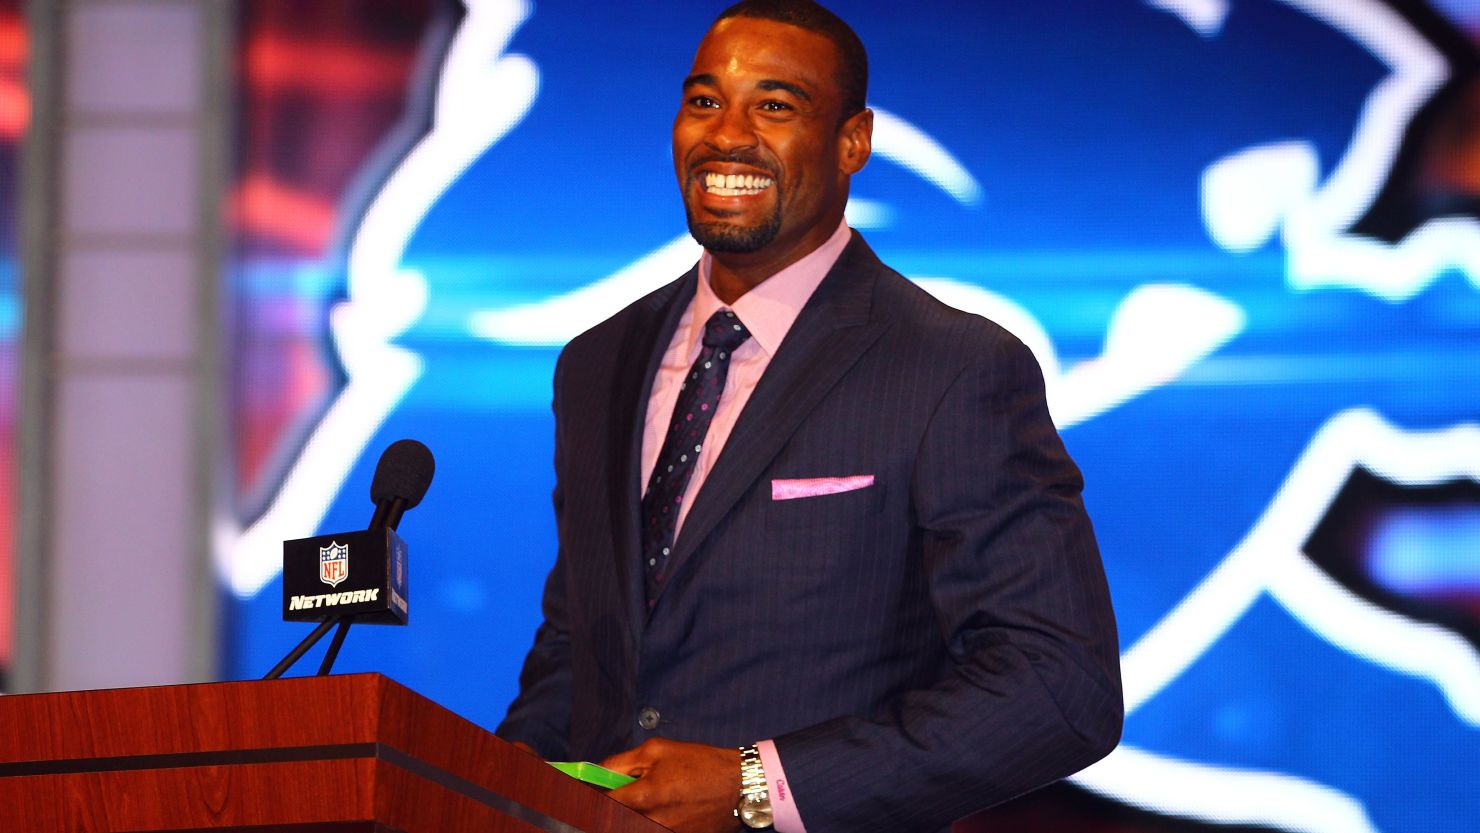 "Madden NFL '13" cover player Calvin Johnson of the Detroit Lions announces a Lions' pick at the 2012 NFL Draft in New York.